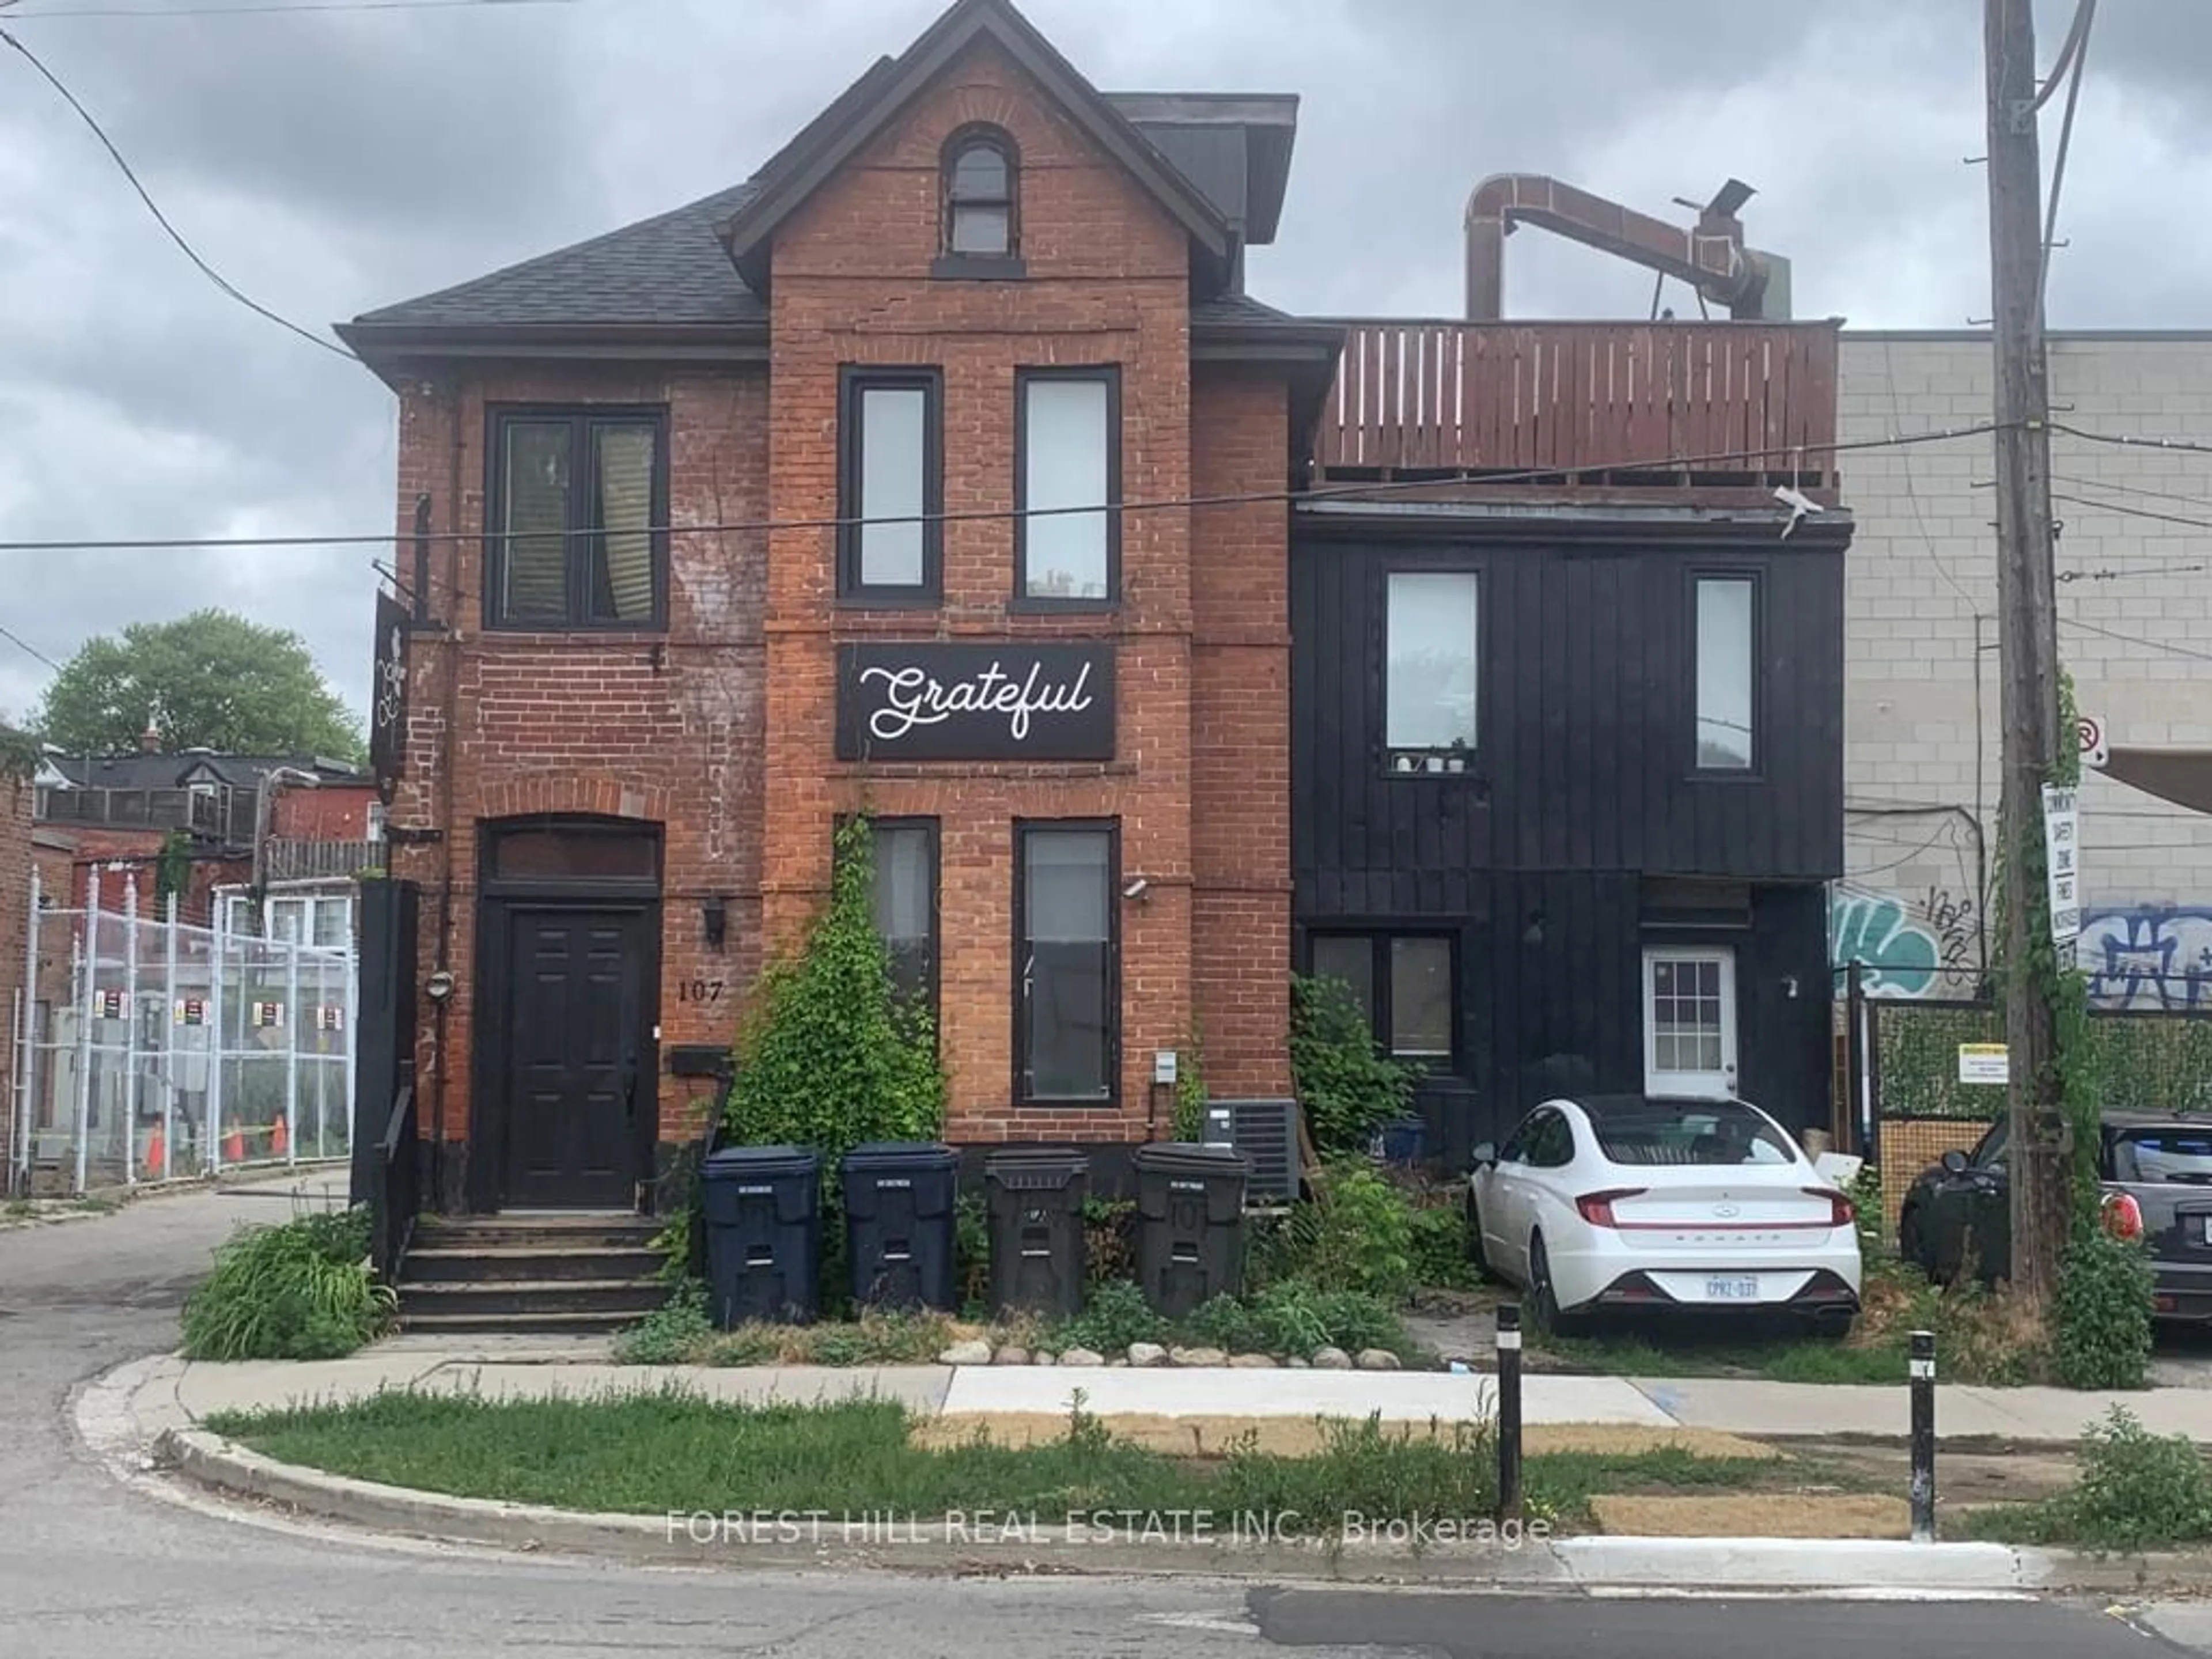 Home with brick exterior material for 107 Shaw St, Toronto Ontario M6J 2W4